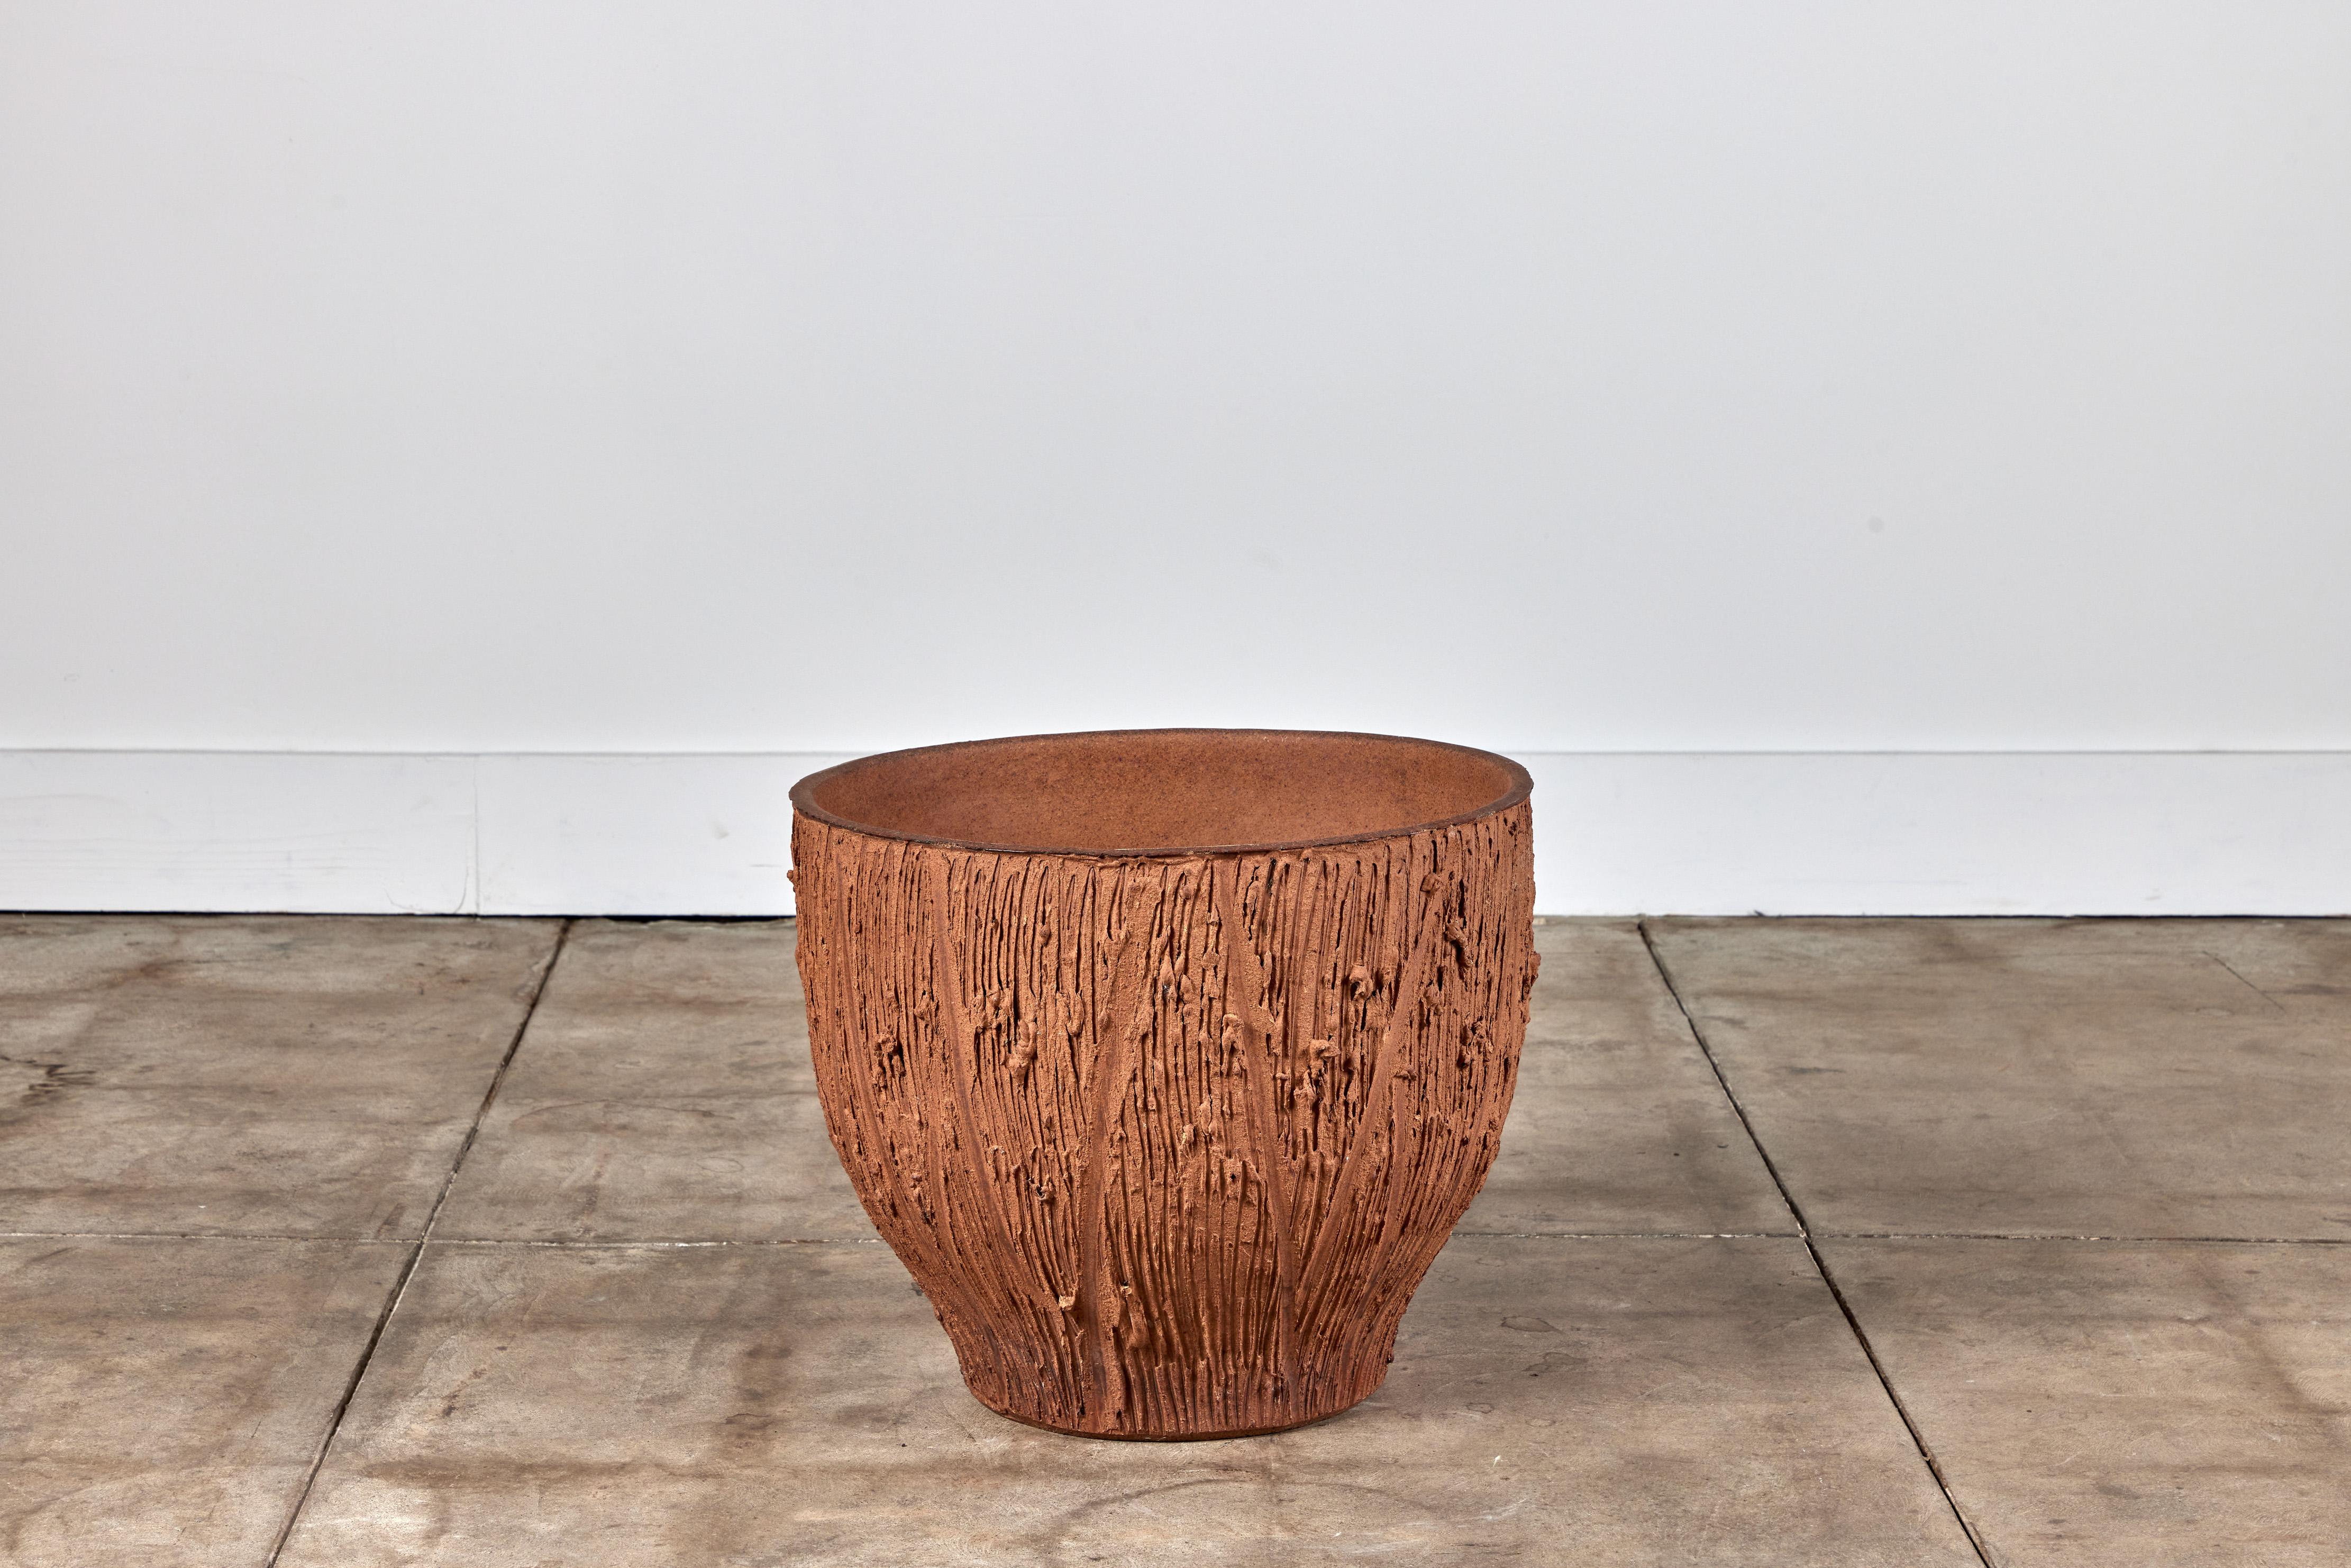 Planter by David Cressey from the Pro/Artisan collection for Architectural Pottery. This stoneware planter has an unglazed interior as well as an unglazed natural warm brown clay exterior with the iconic 